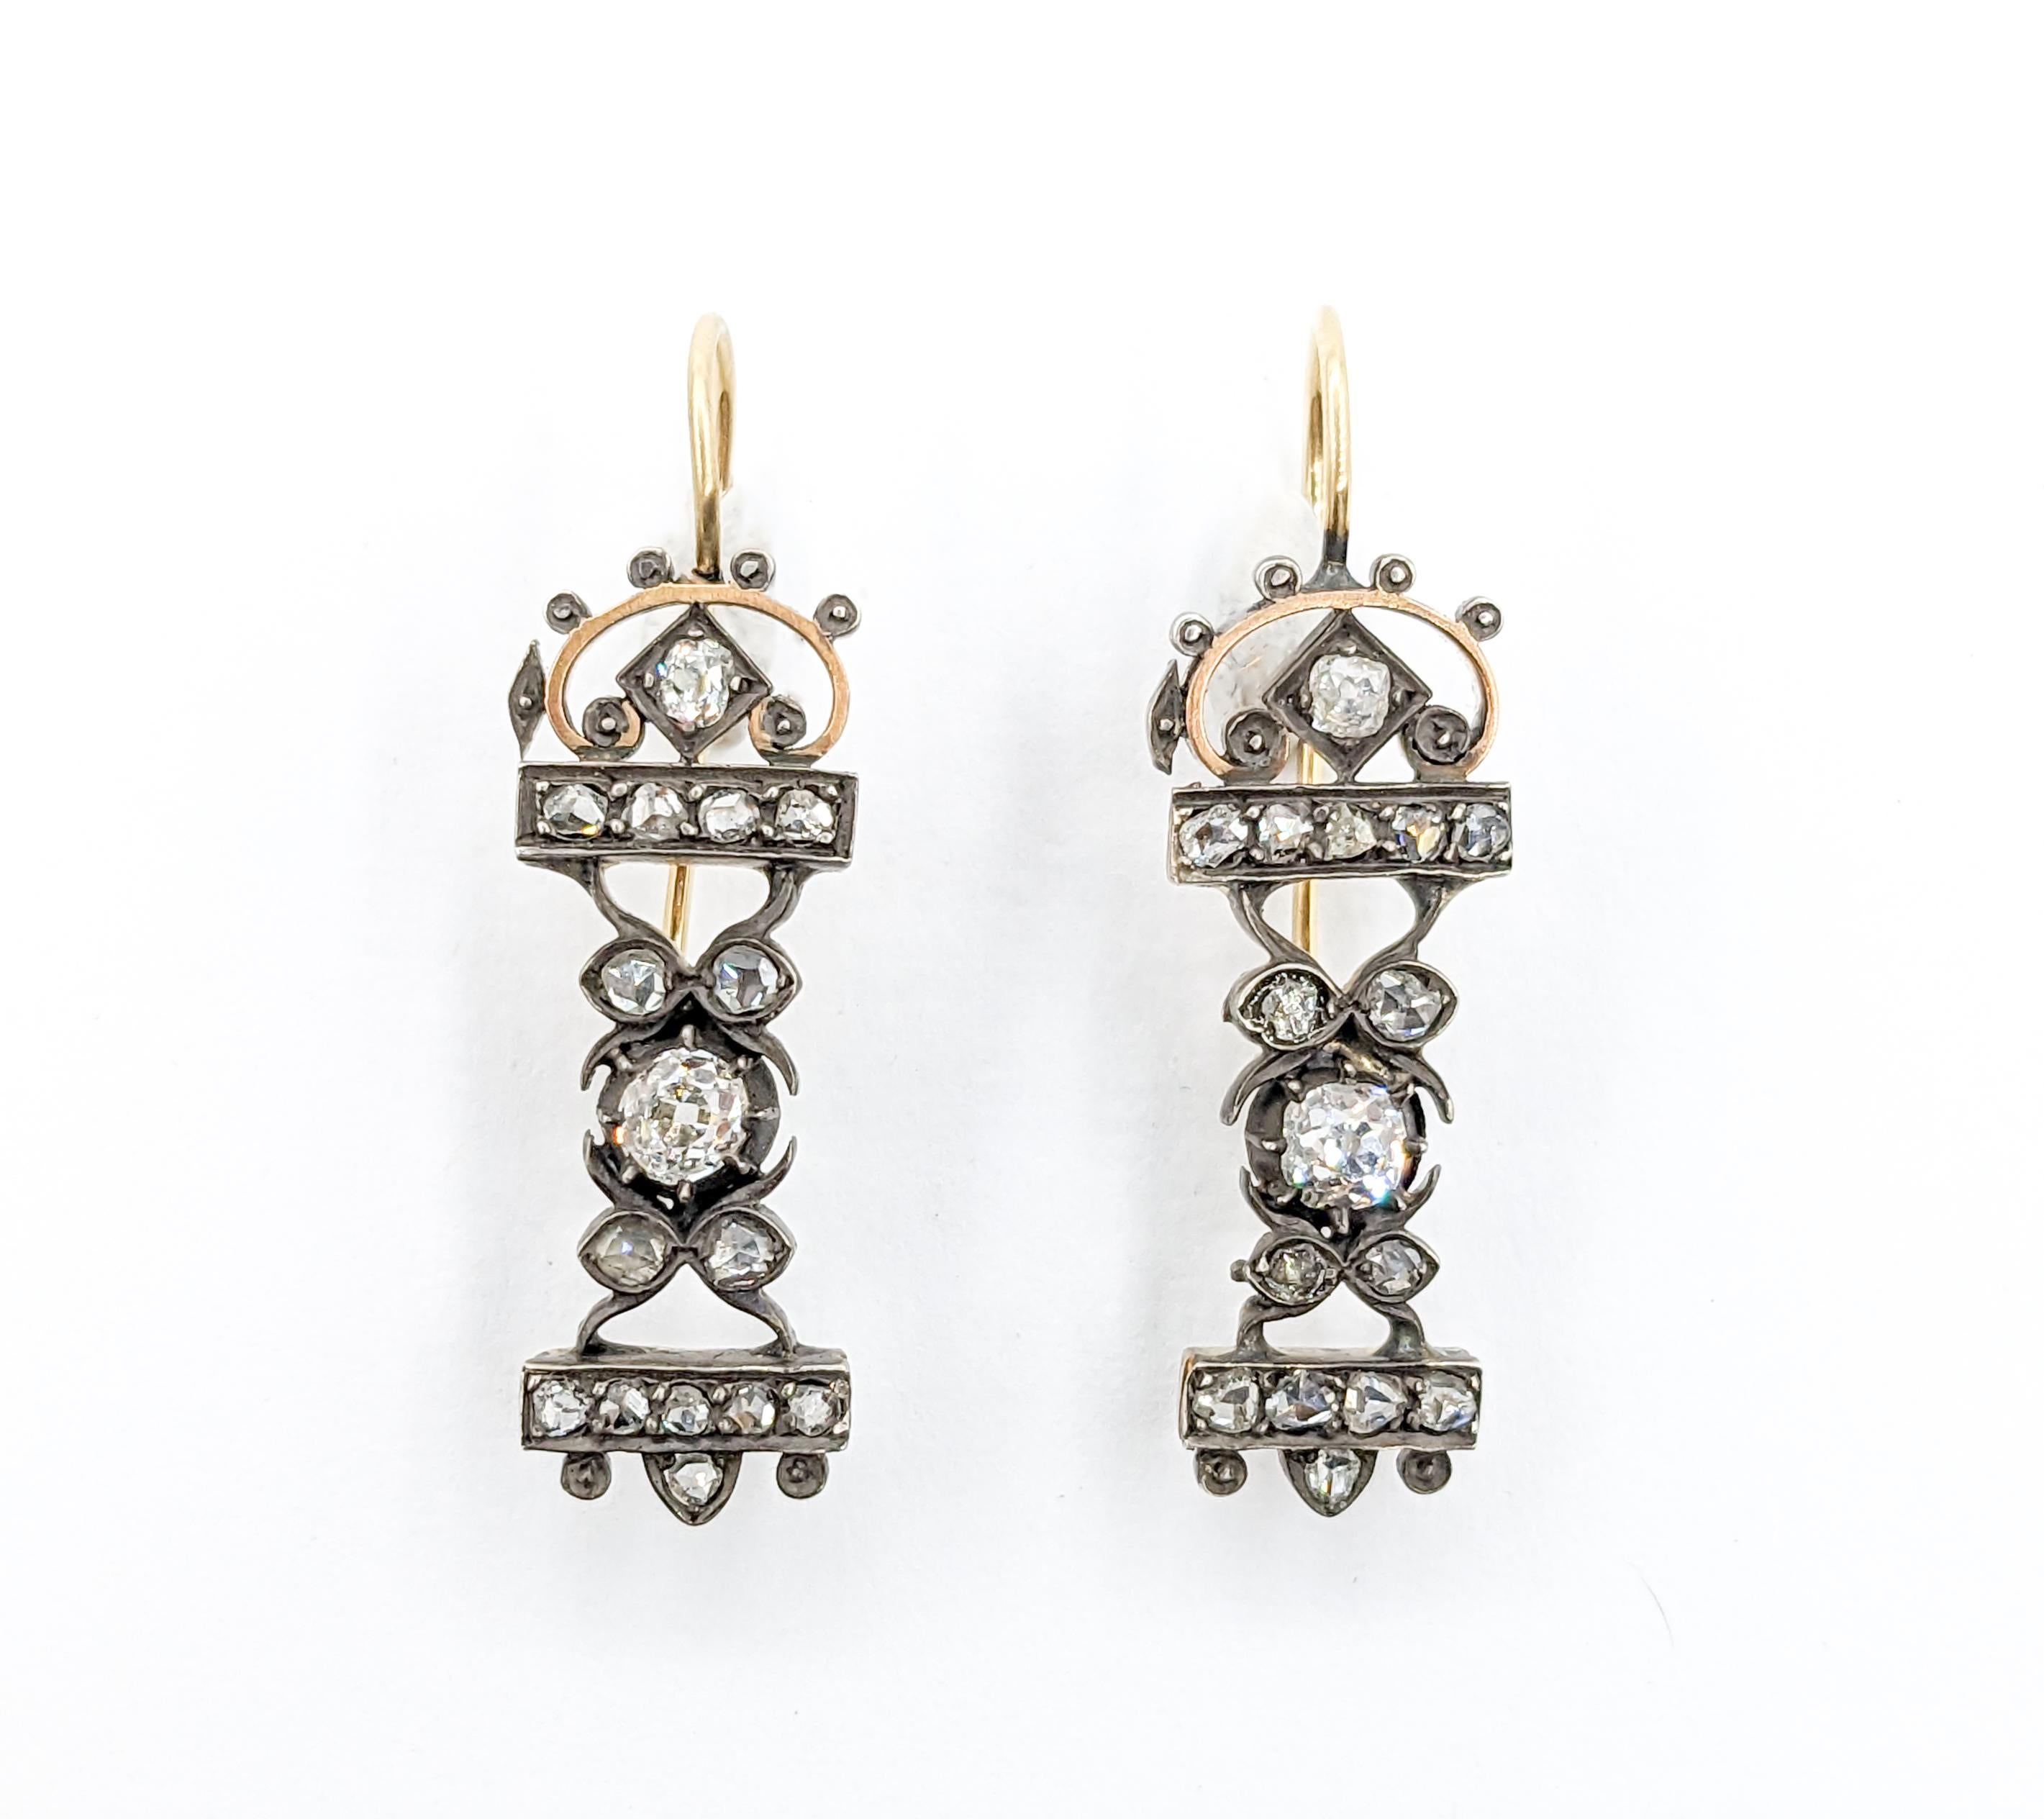 Antique 1.85ctw Diamond Earrings In 14kt Gold & Sterling silver In Excellent Condition For Sale In Bloomington, MN